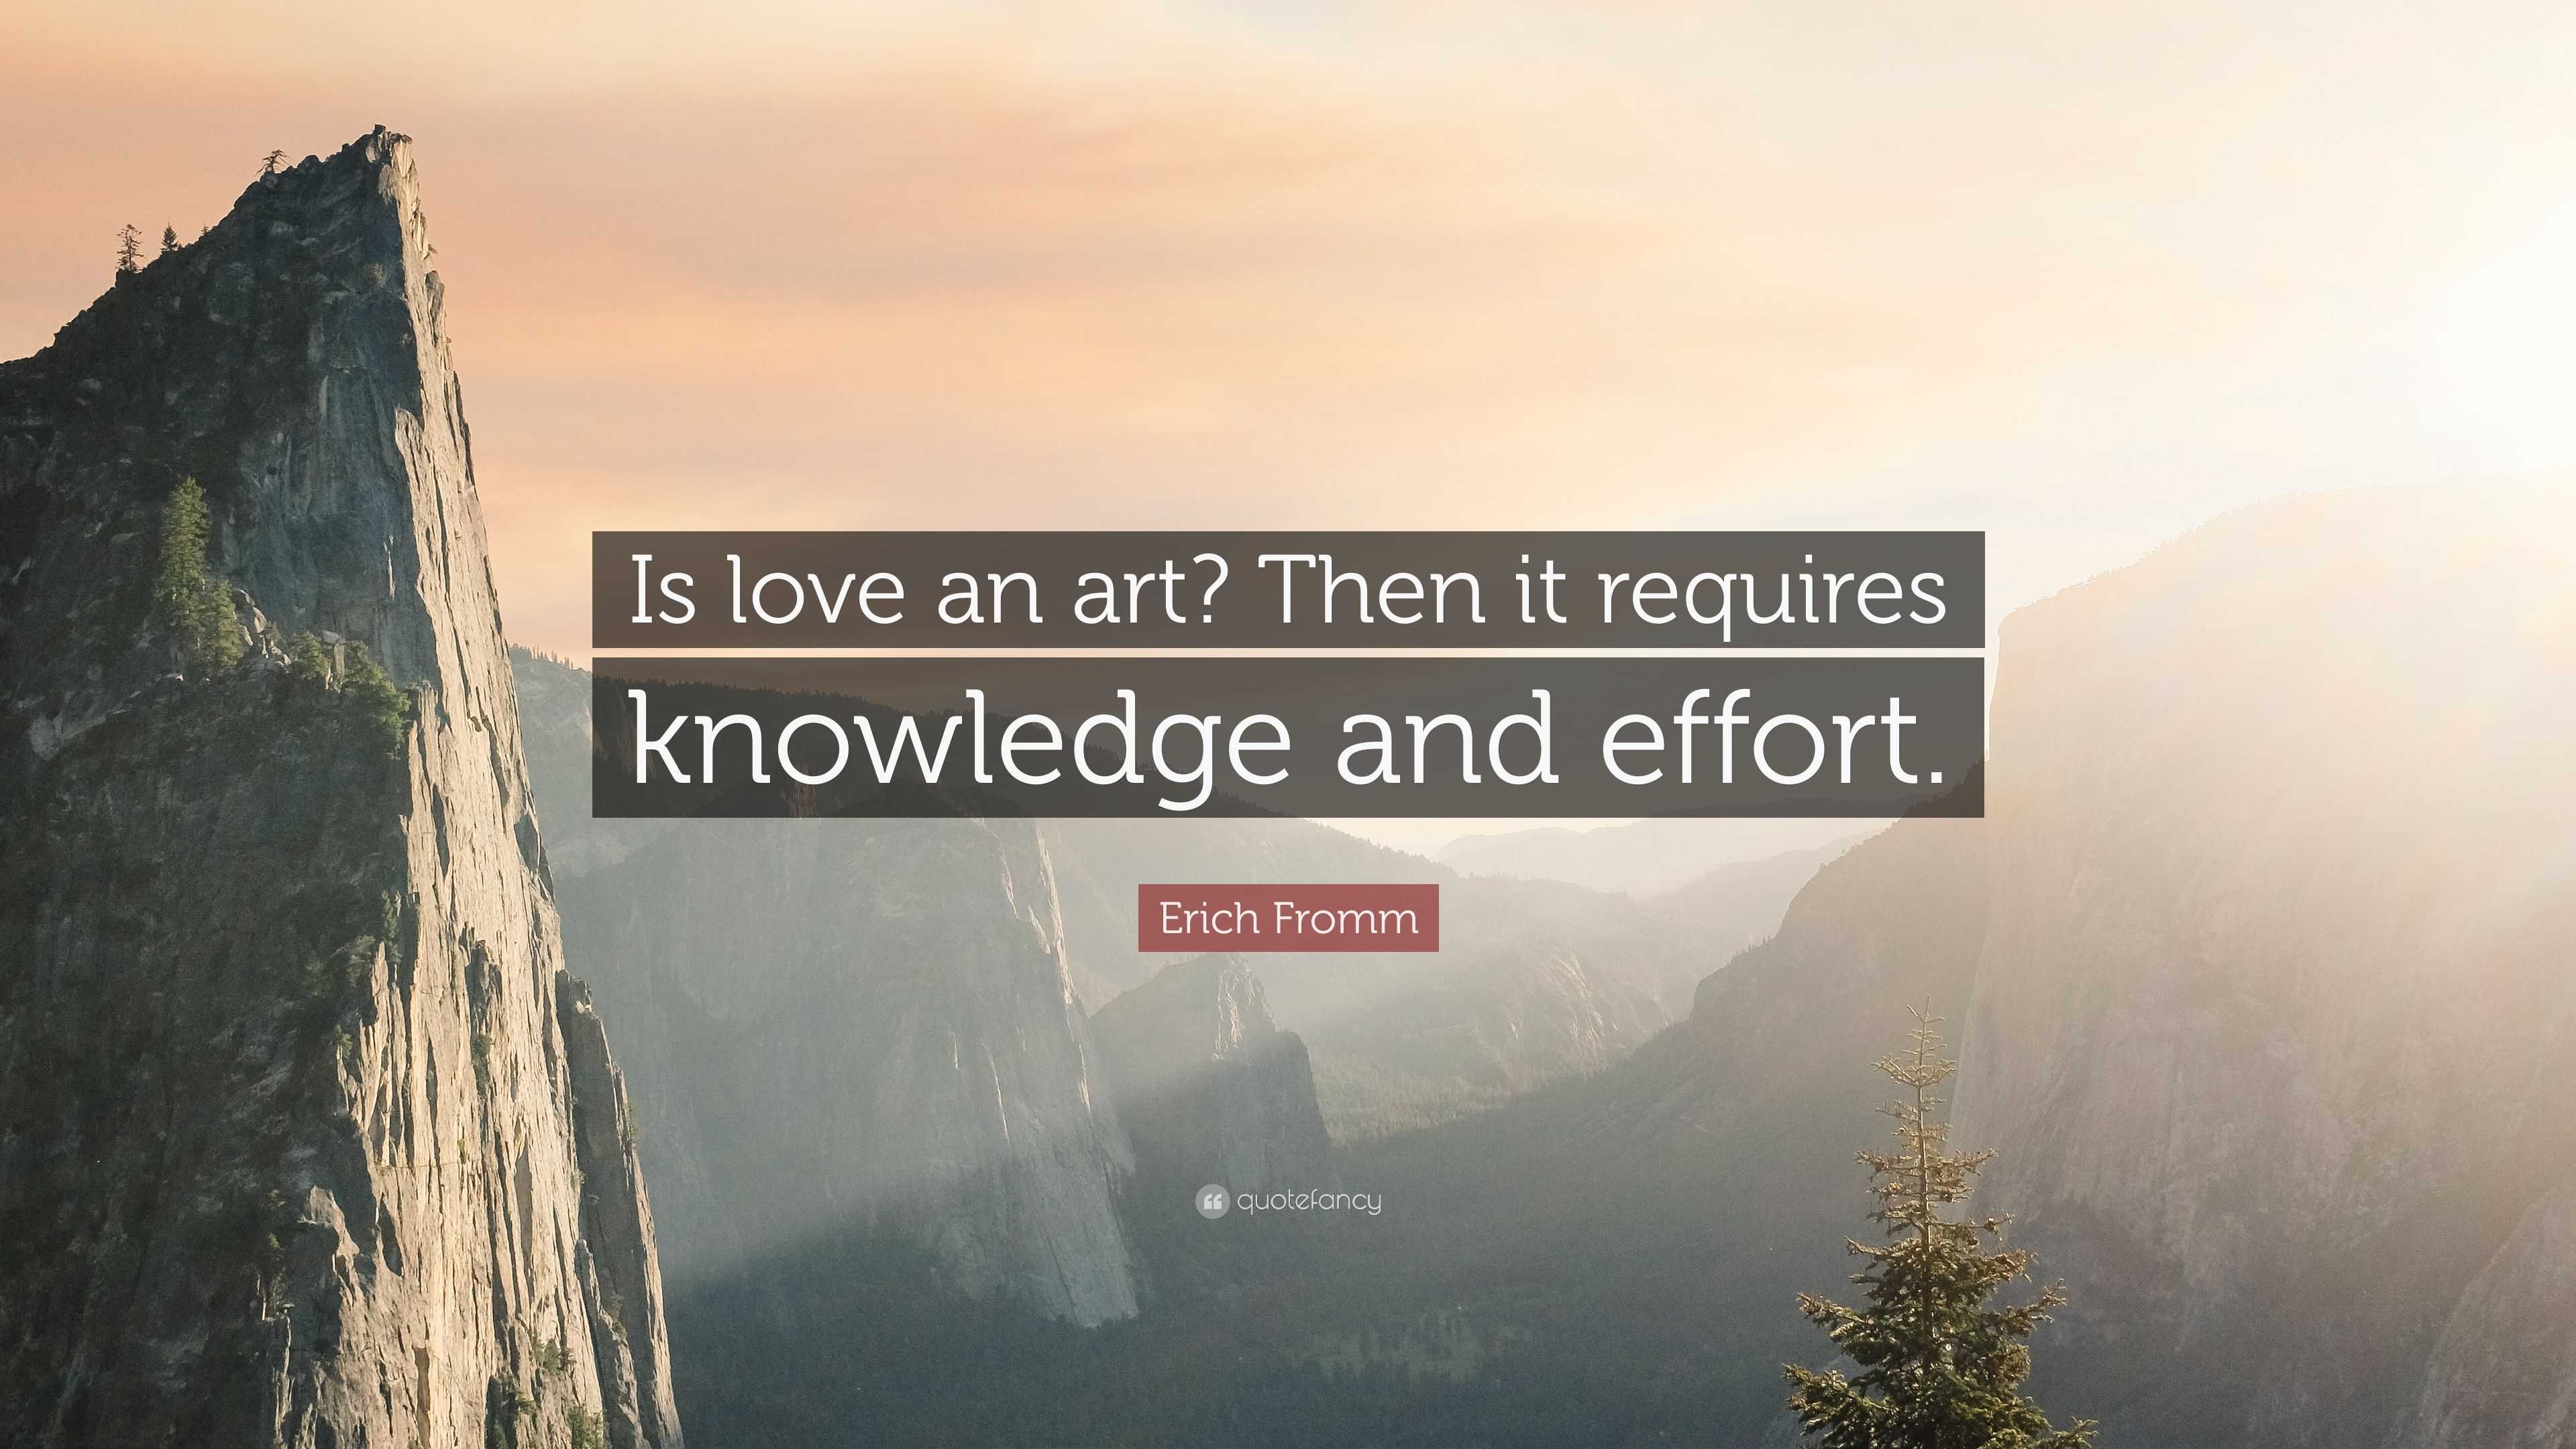 Erich Fromm Quote “Is love an art Then it requires knowledge and effort